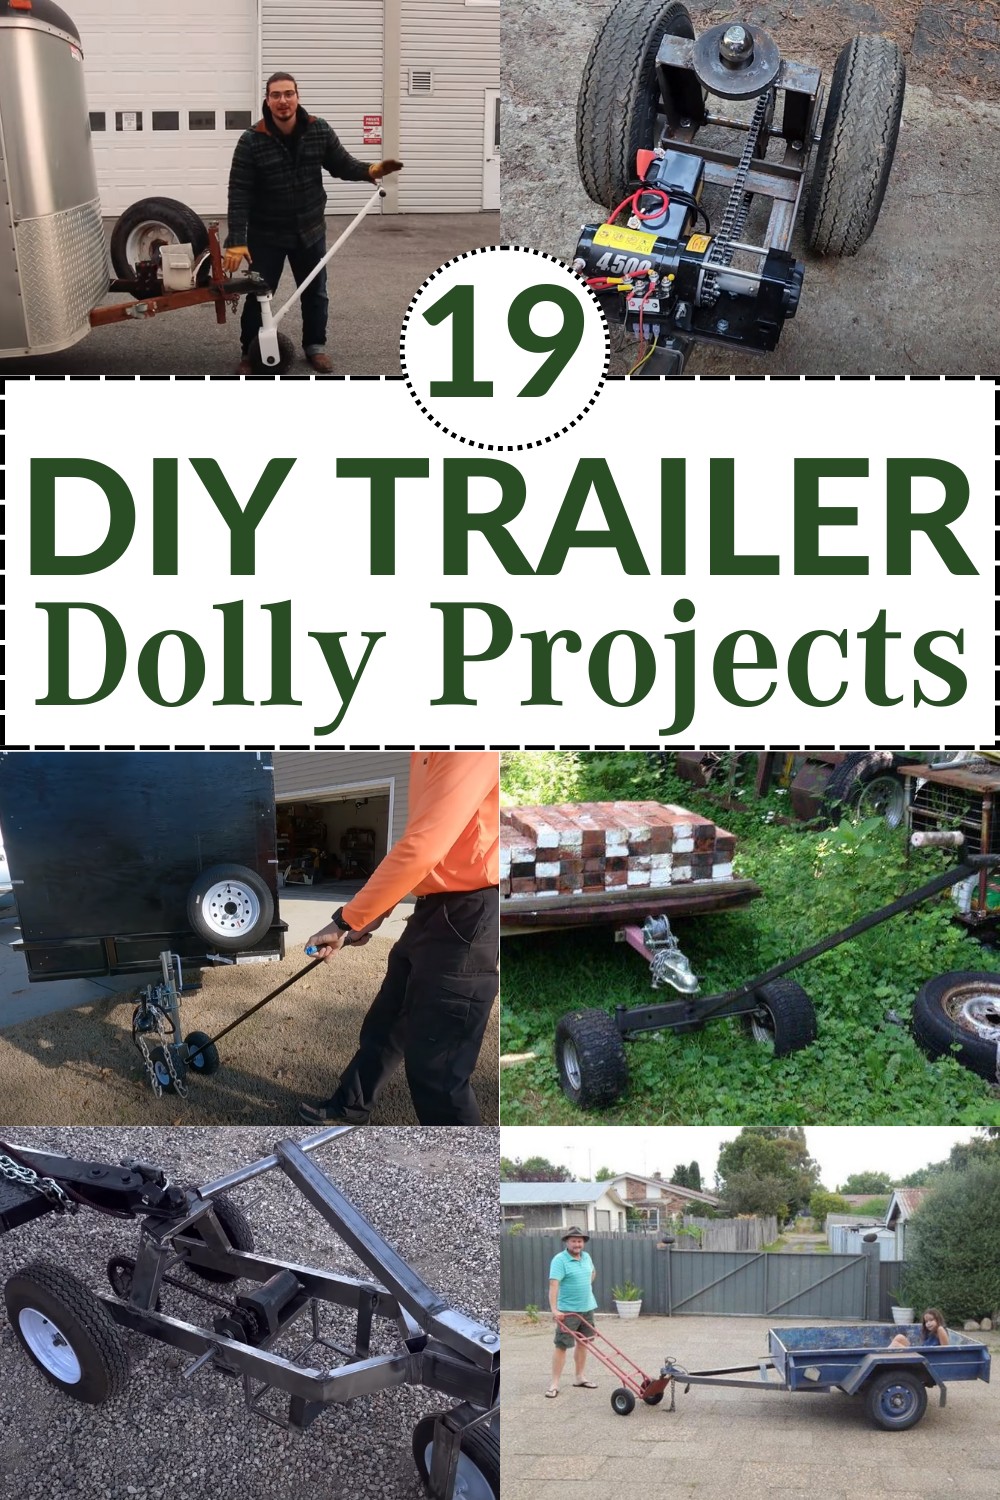 DIY Trailer Dolly Projects